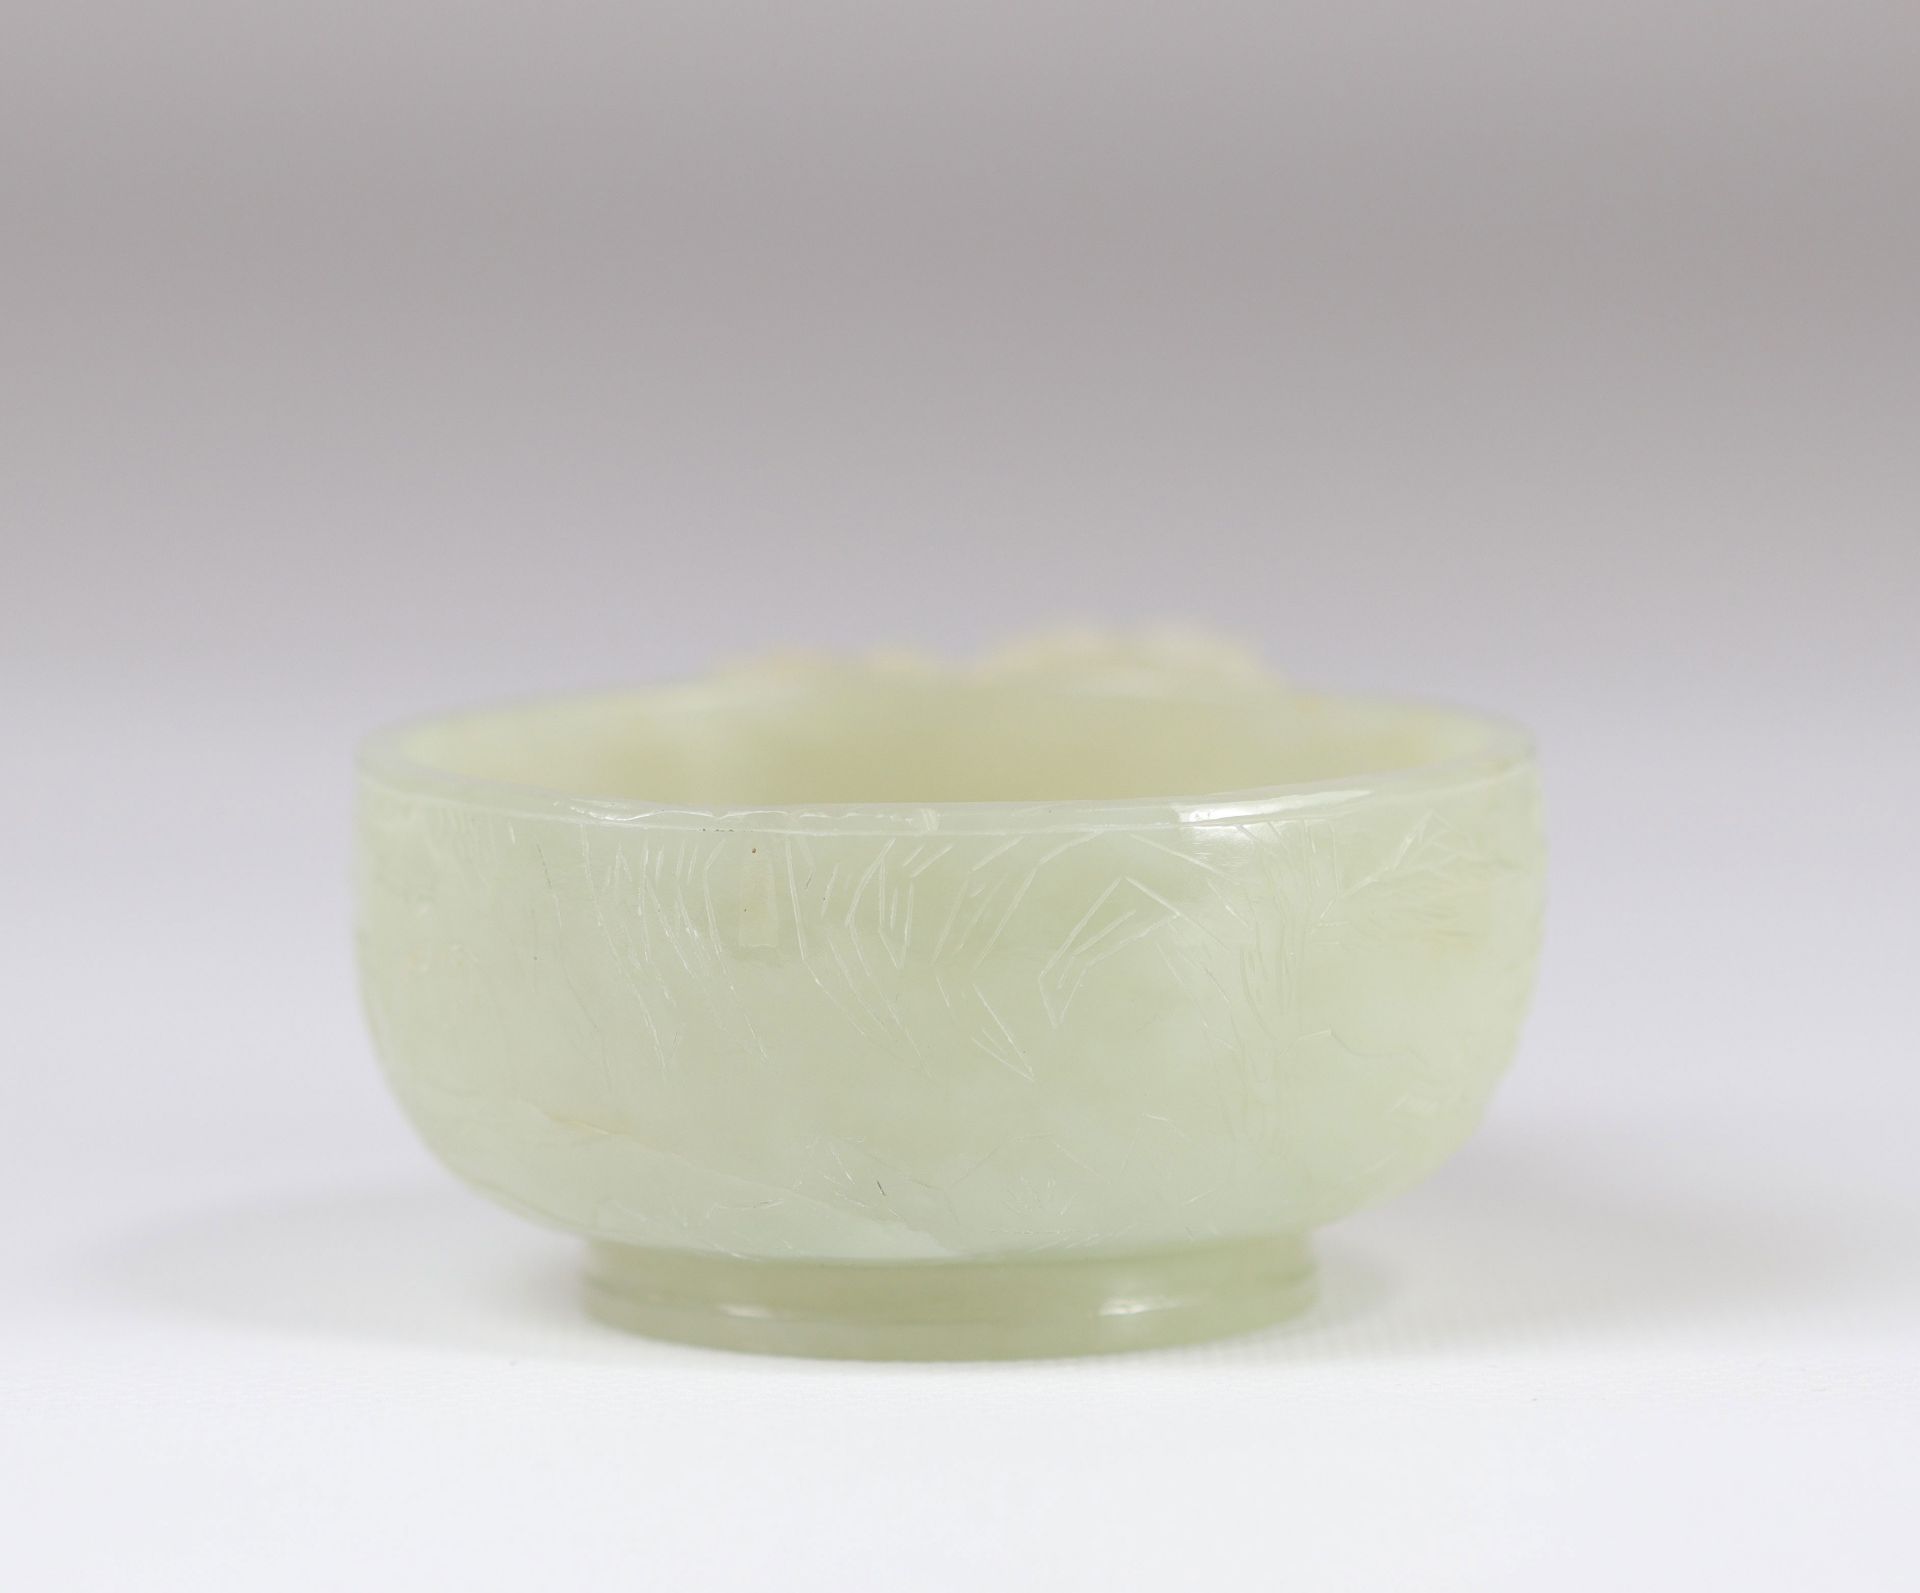 White jade water pot with vegetable decoration, Qing dynasty China - Image 8 of 10